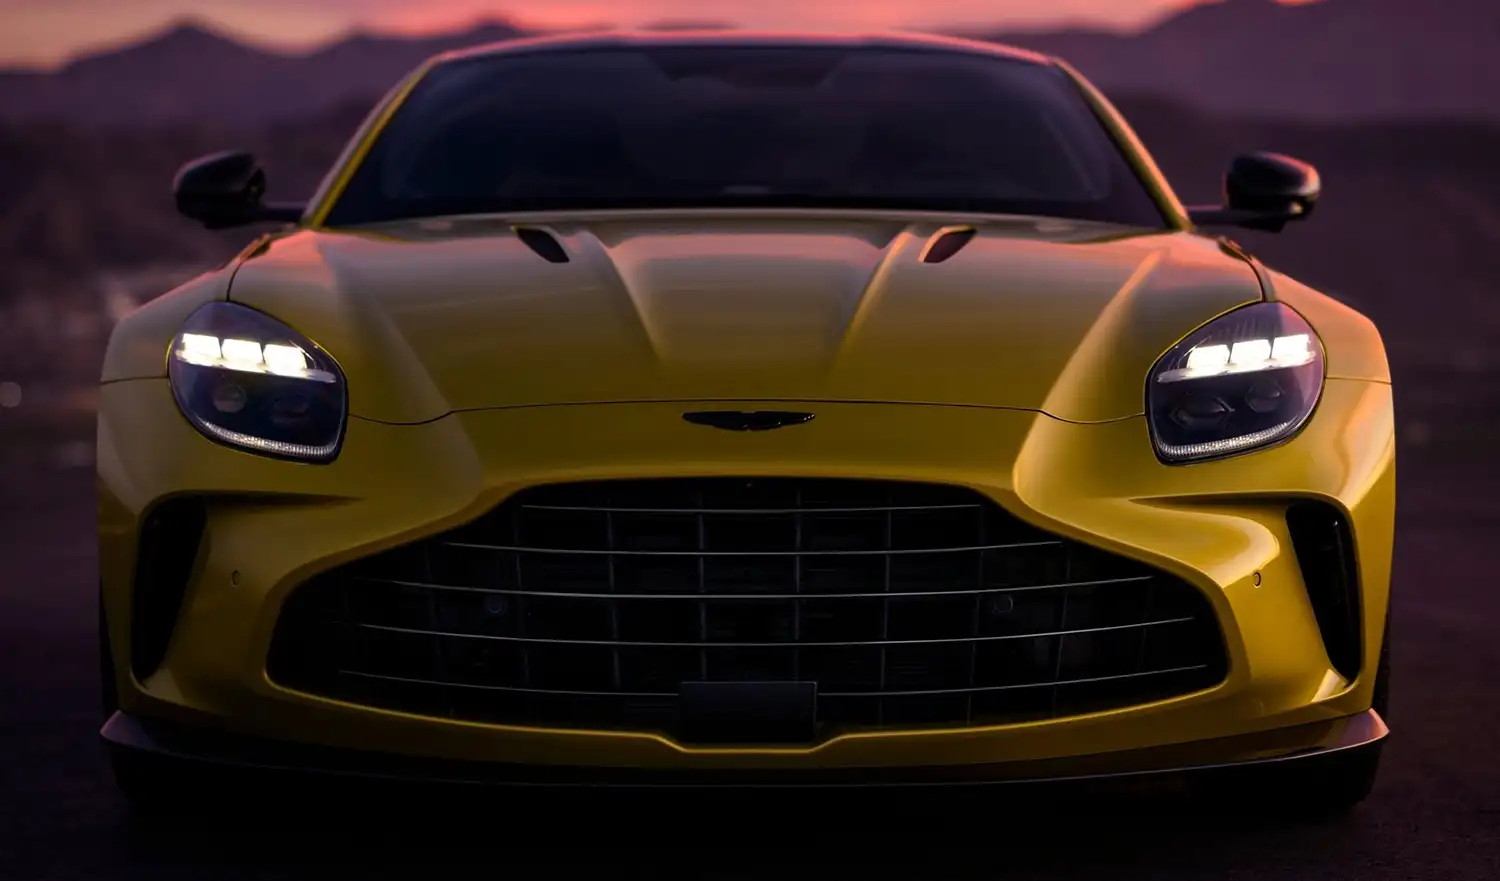 Aston Martin may plan their first 'big upgrade' on THIS track